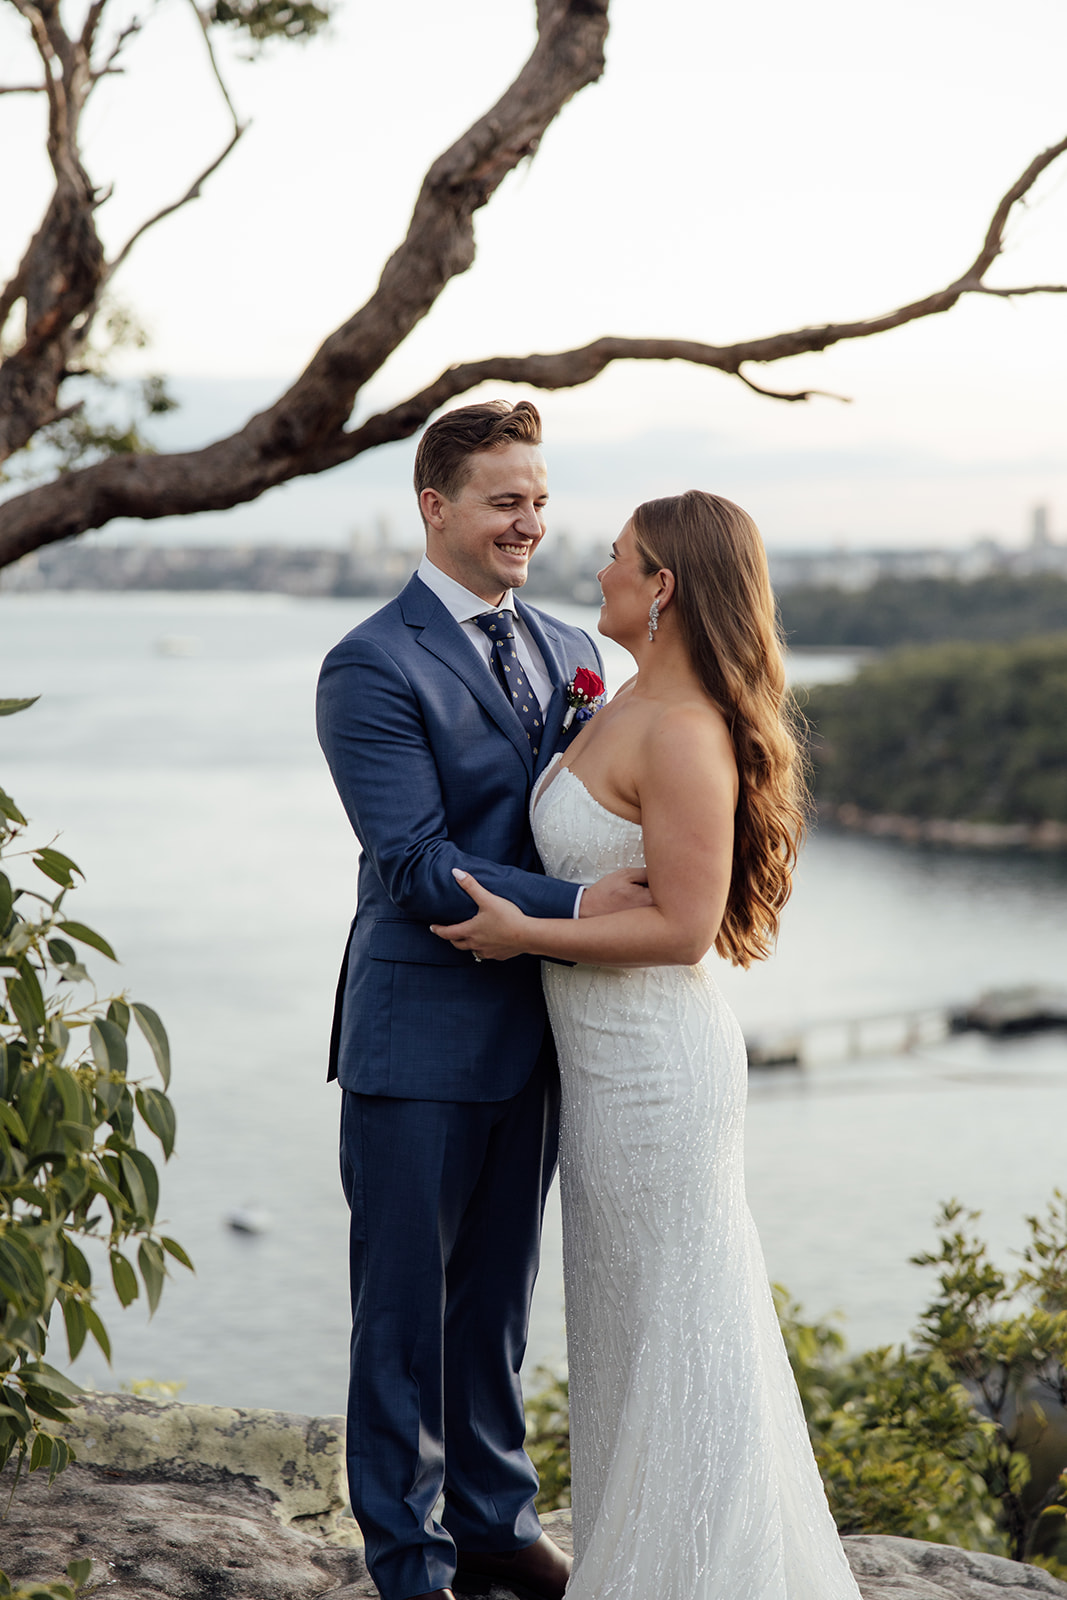 A bride and groom with ocean views